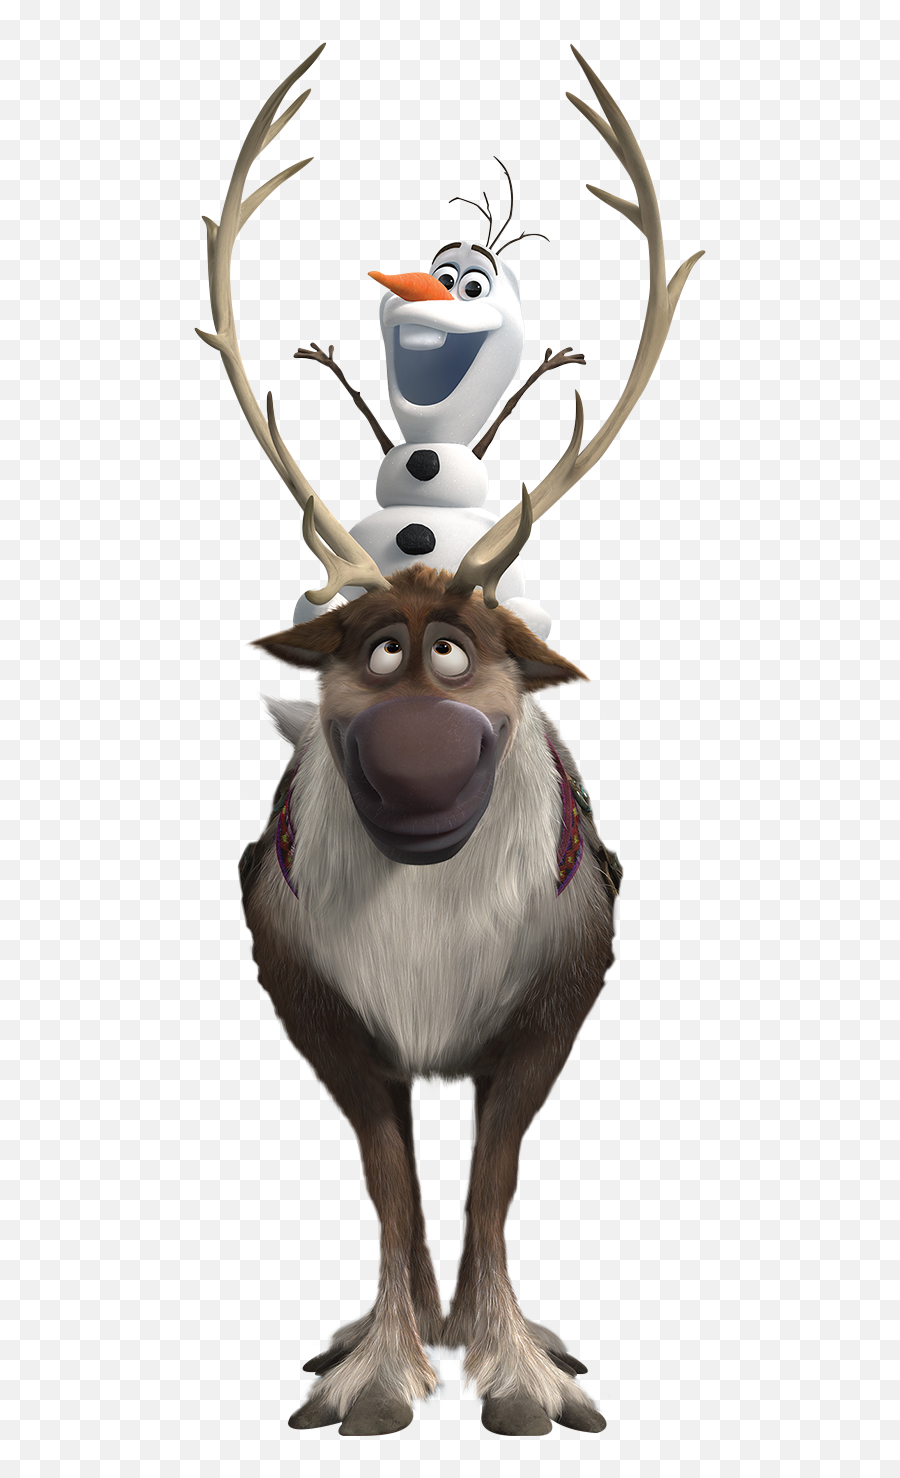 Frozen Sven Png Picture - Olaf And Sven Frozen,Frozen Logo Png